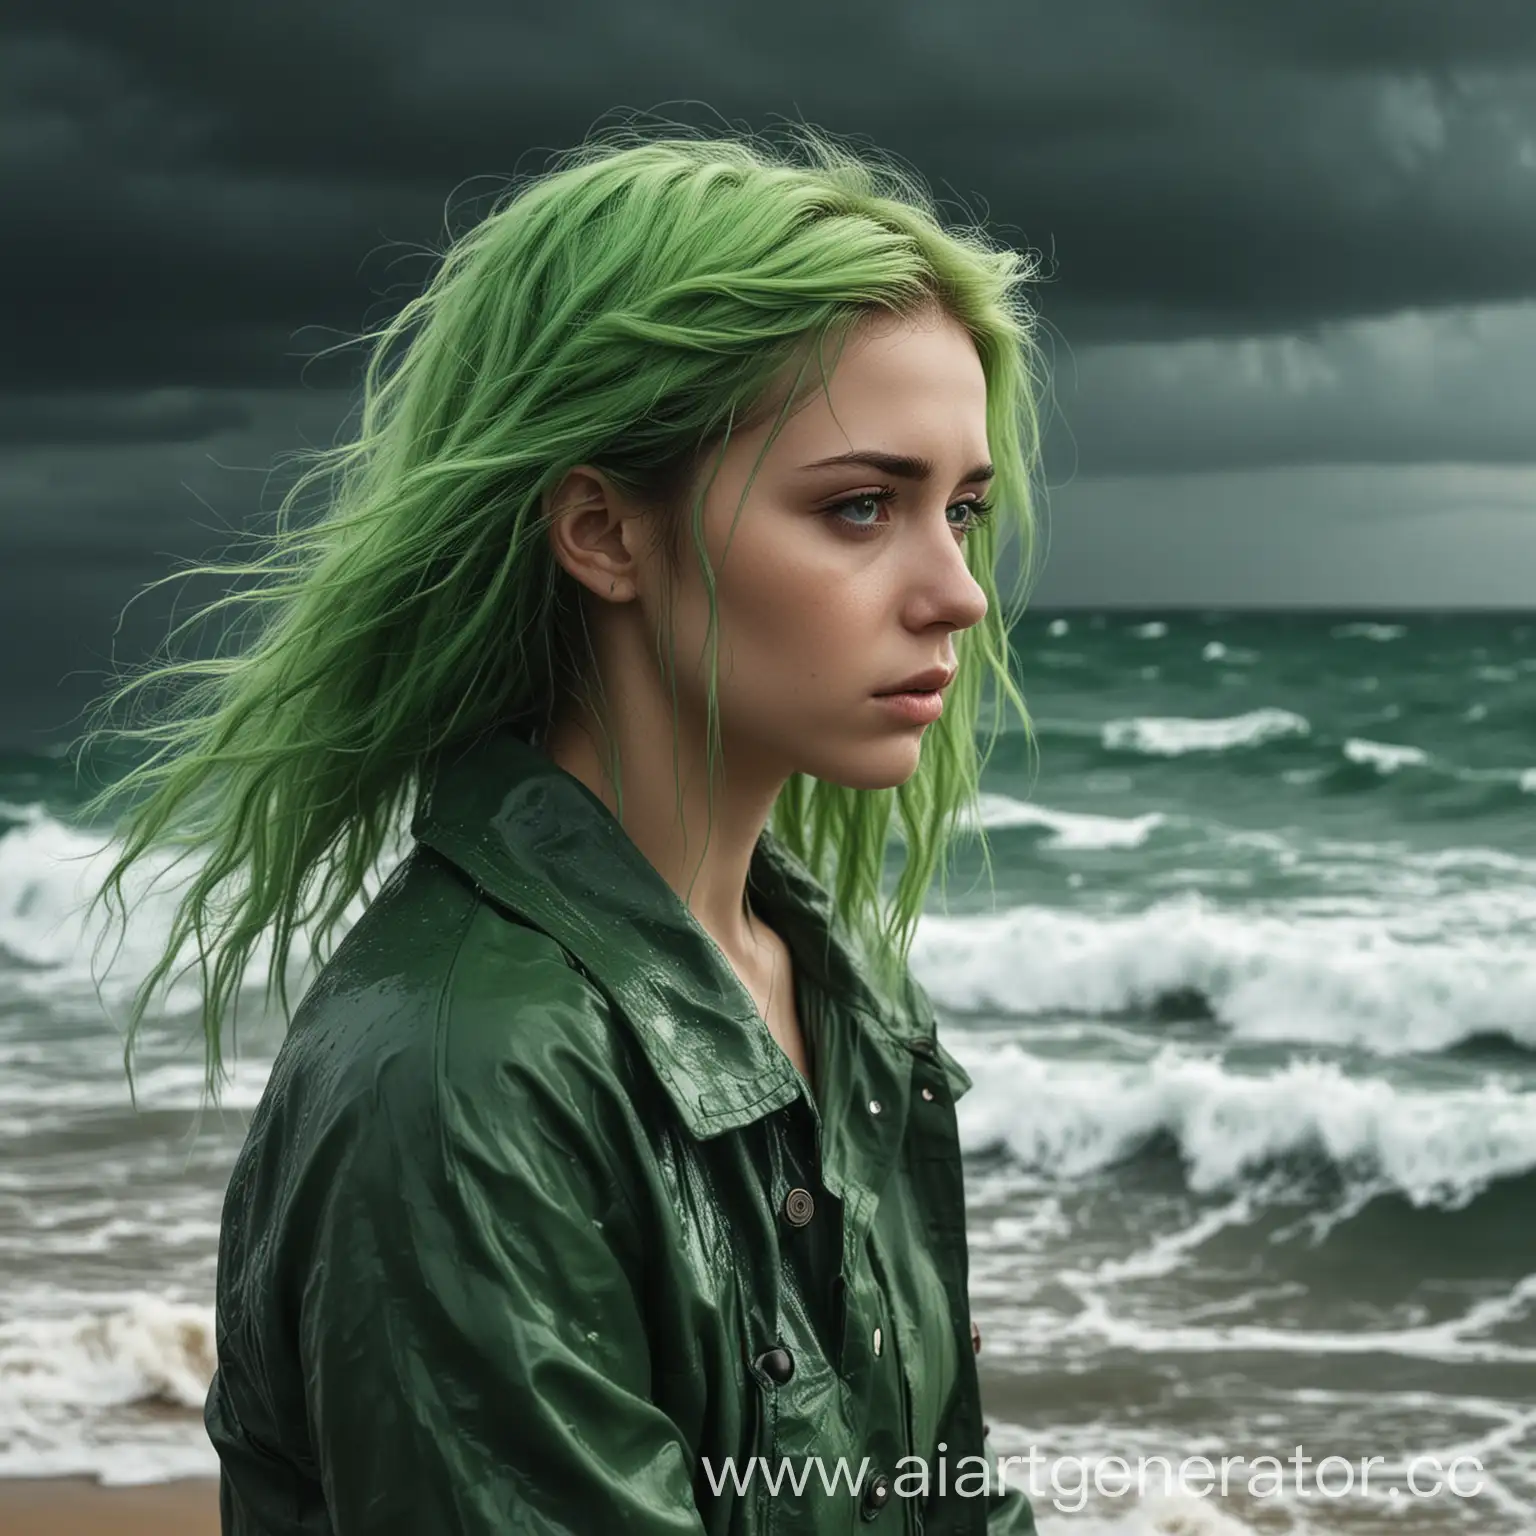 Pensive-Girl-with-Vibrant-Hair-Contemplates-Stormy-Seas-Artistic-Drawing-Style